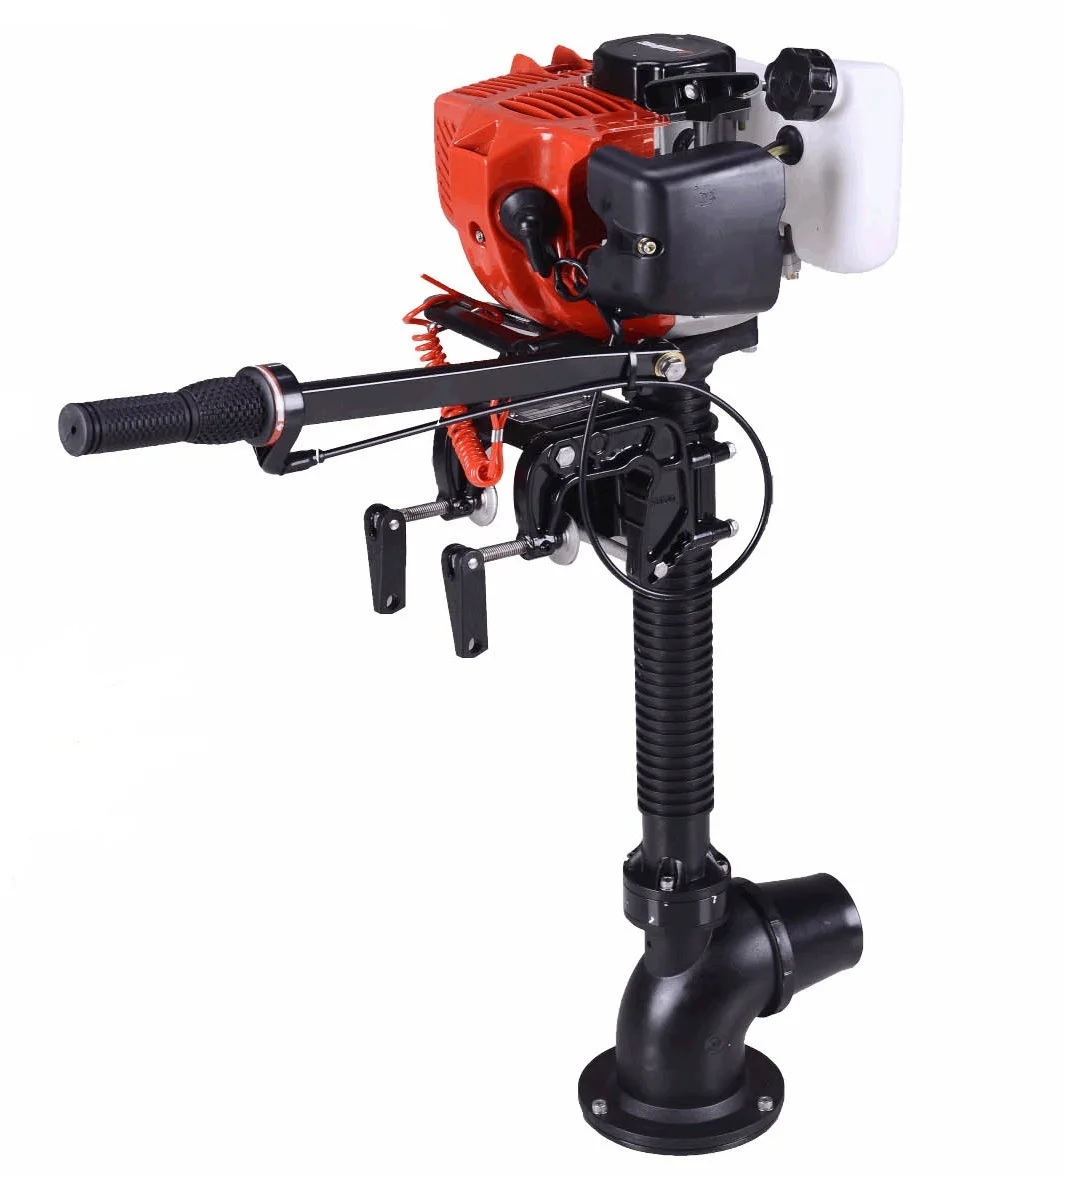 
Jet type outboard motor 2.5hp for small boat air cooled gasoline jet motor 2.5HP 